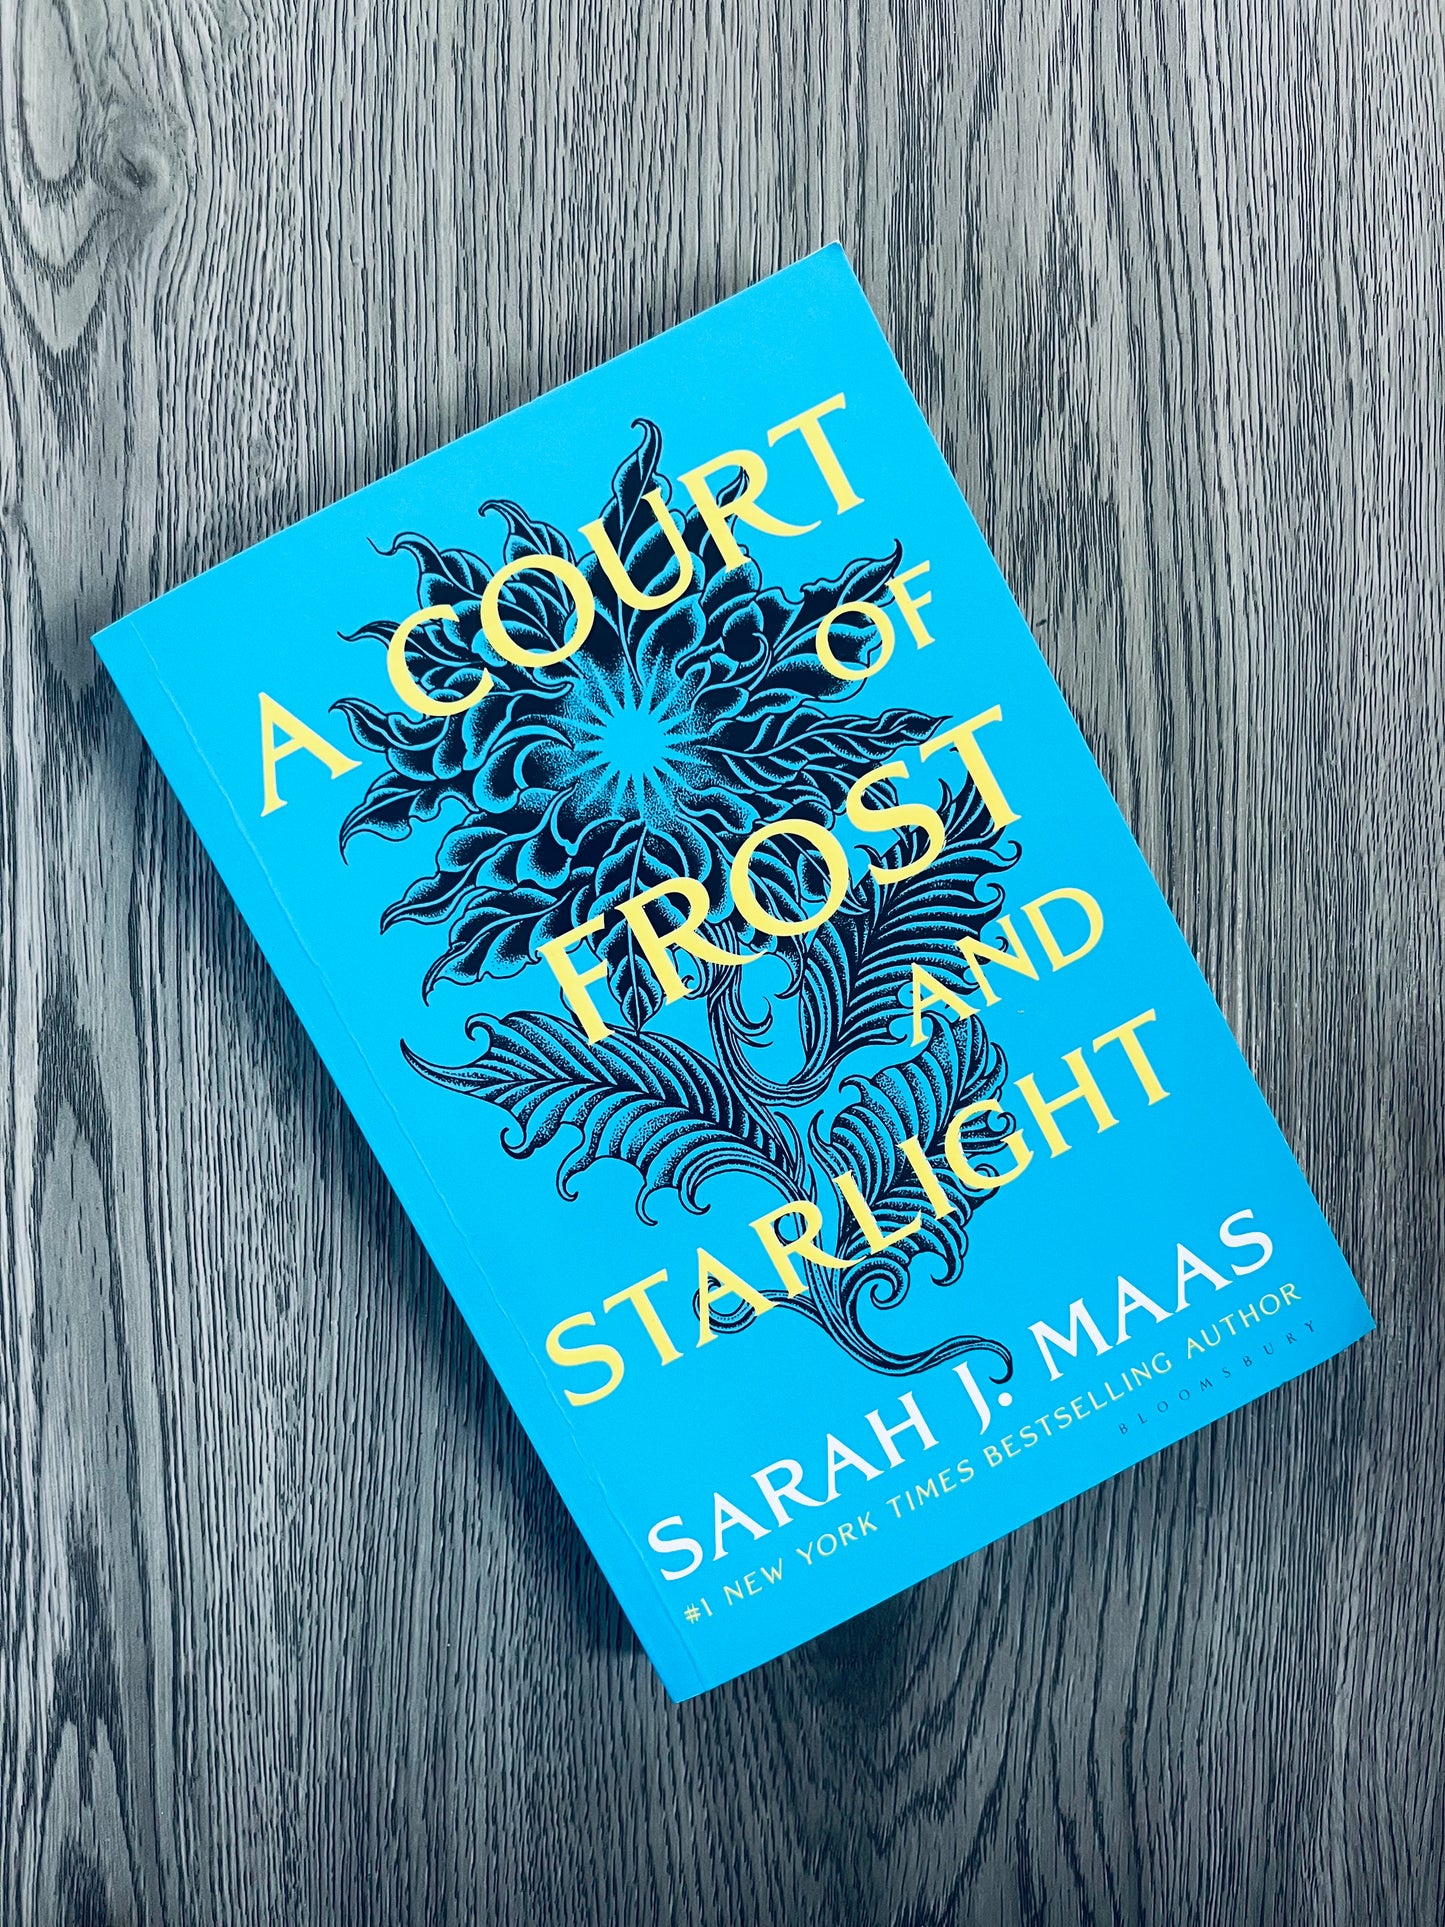 A Court of Frost and Starlight (ACOTAR #3.1) by Sarah J. Maas